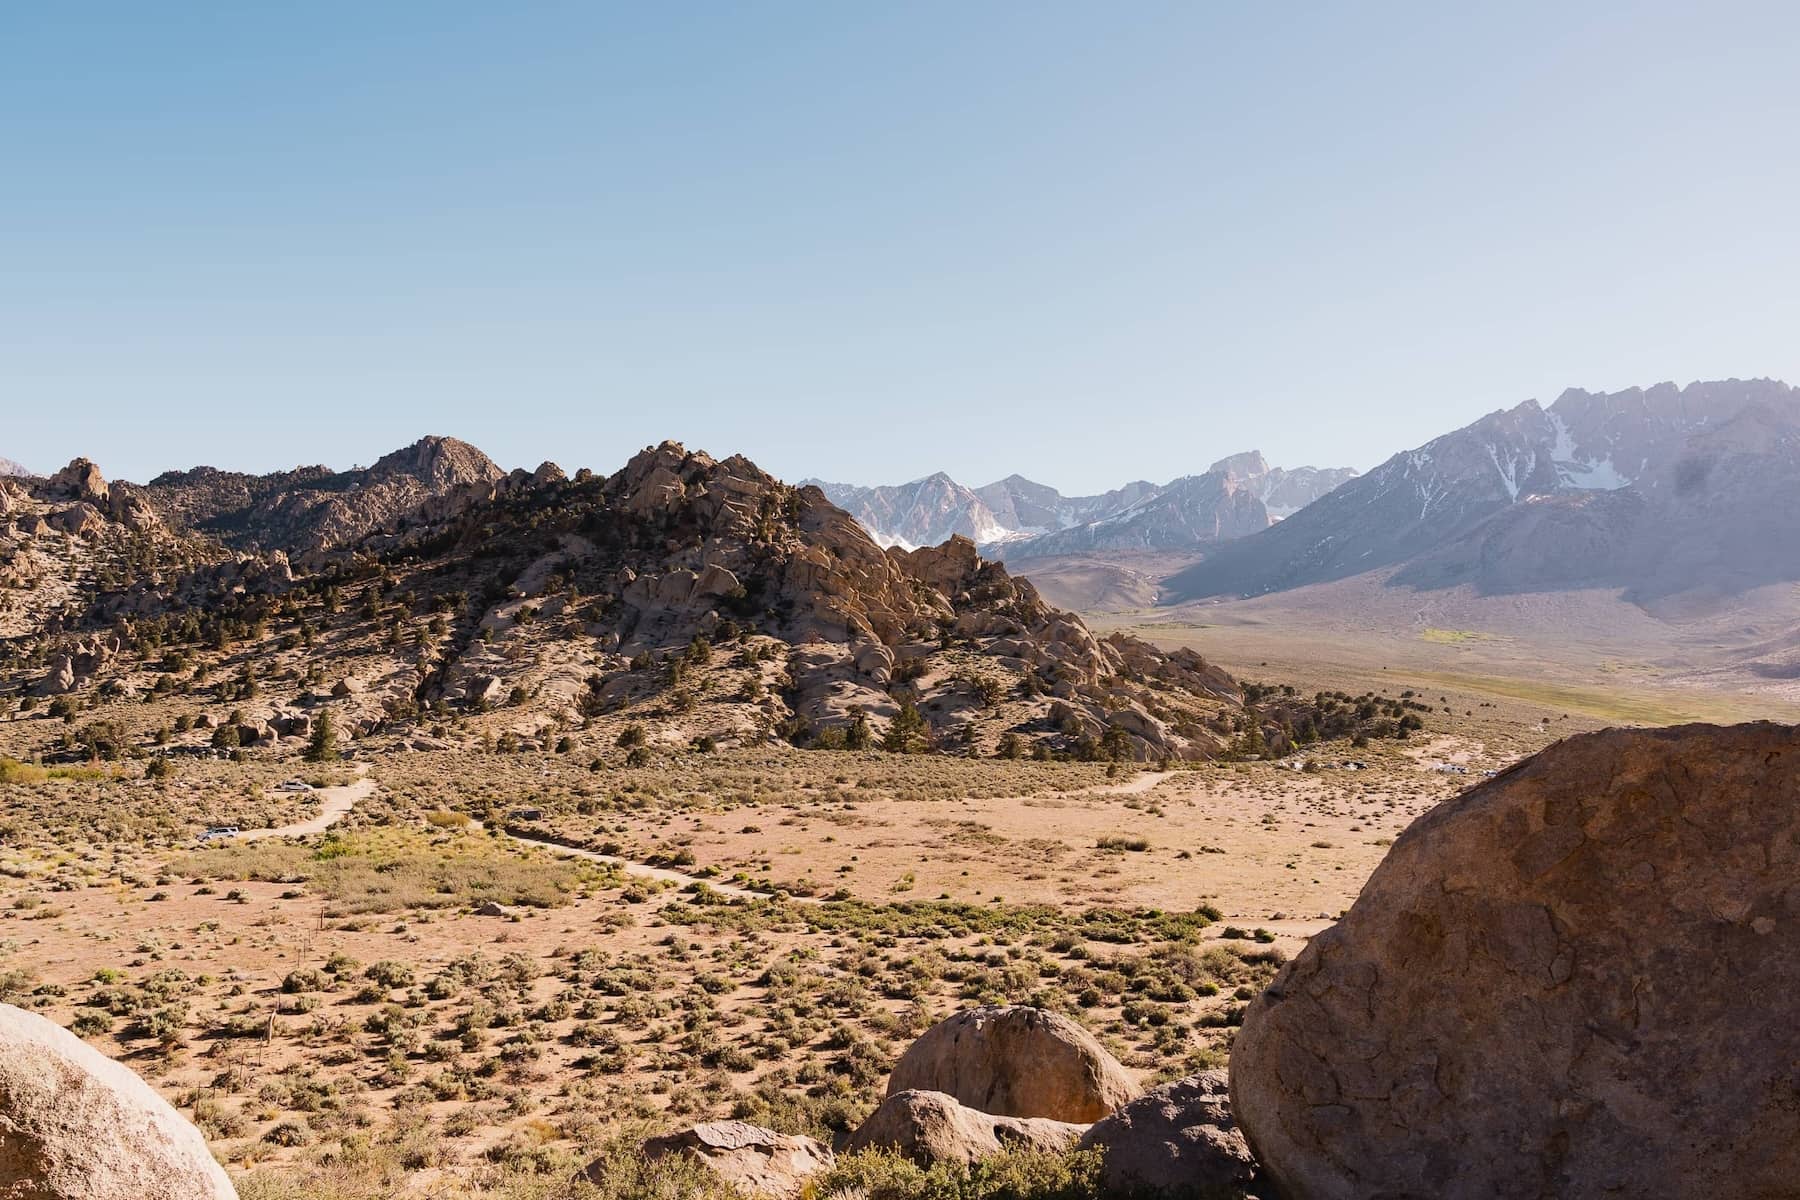 A mountainous desert scene with dirt roads criss-crossing with mountains in the background and large boulder piles where rock climbers are exerting their sport. A few cars are scattered about.